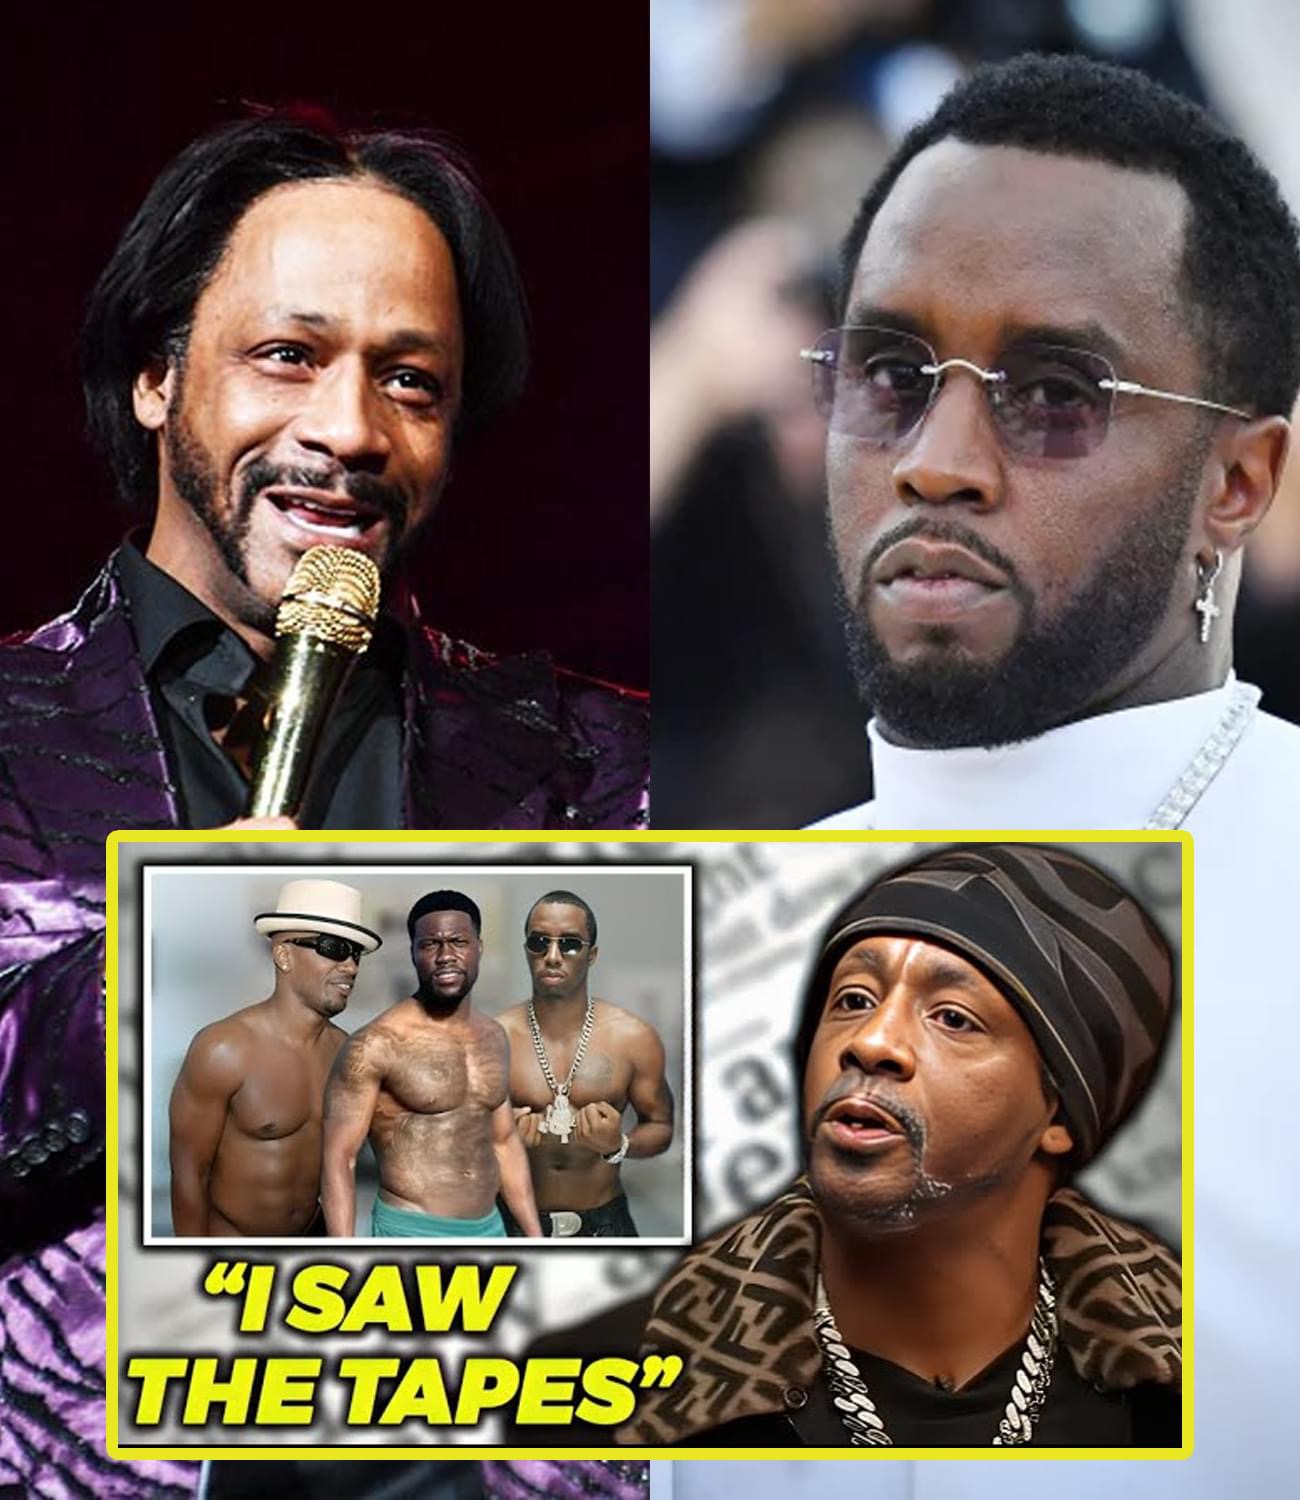 5 MINUTES AGO: Katt Williams EXPOSES Kevin Hart & Jamie Foxx For Being Diddy’s FREAK OFF Partners